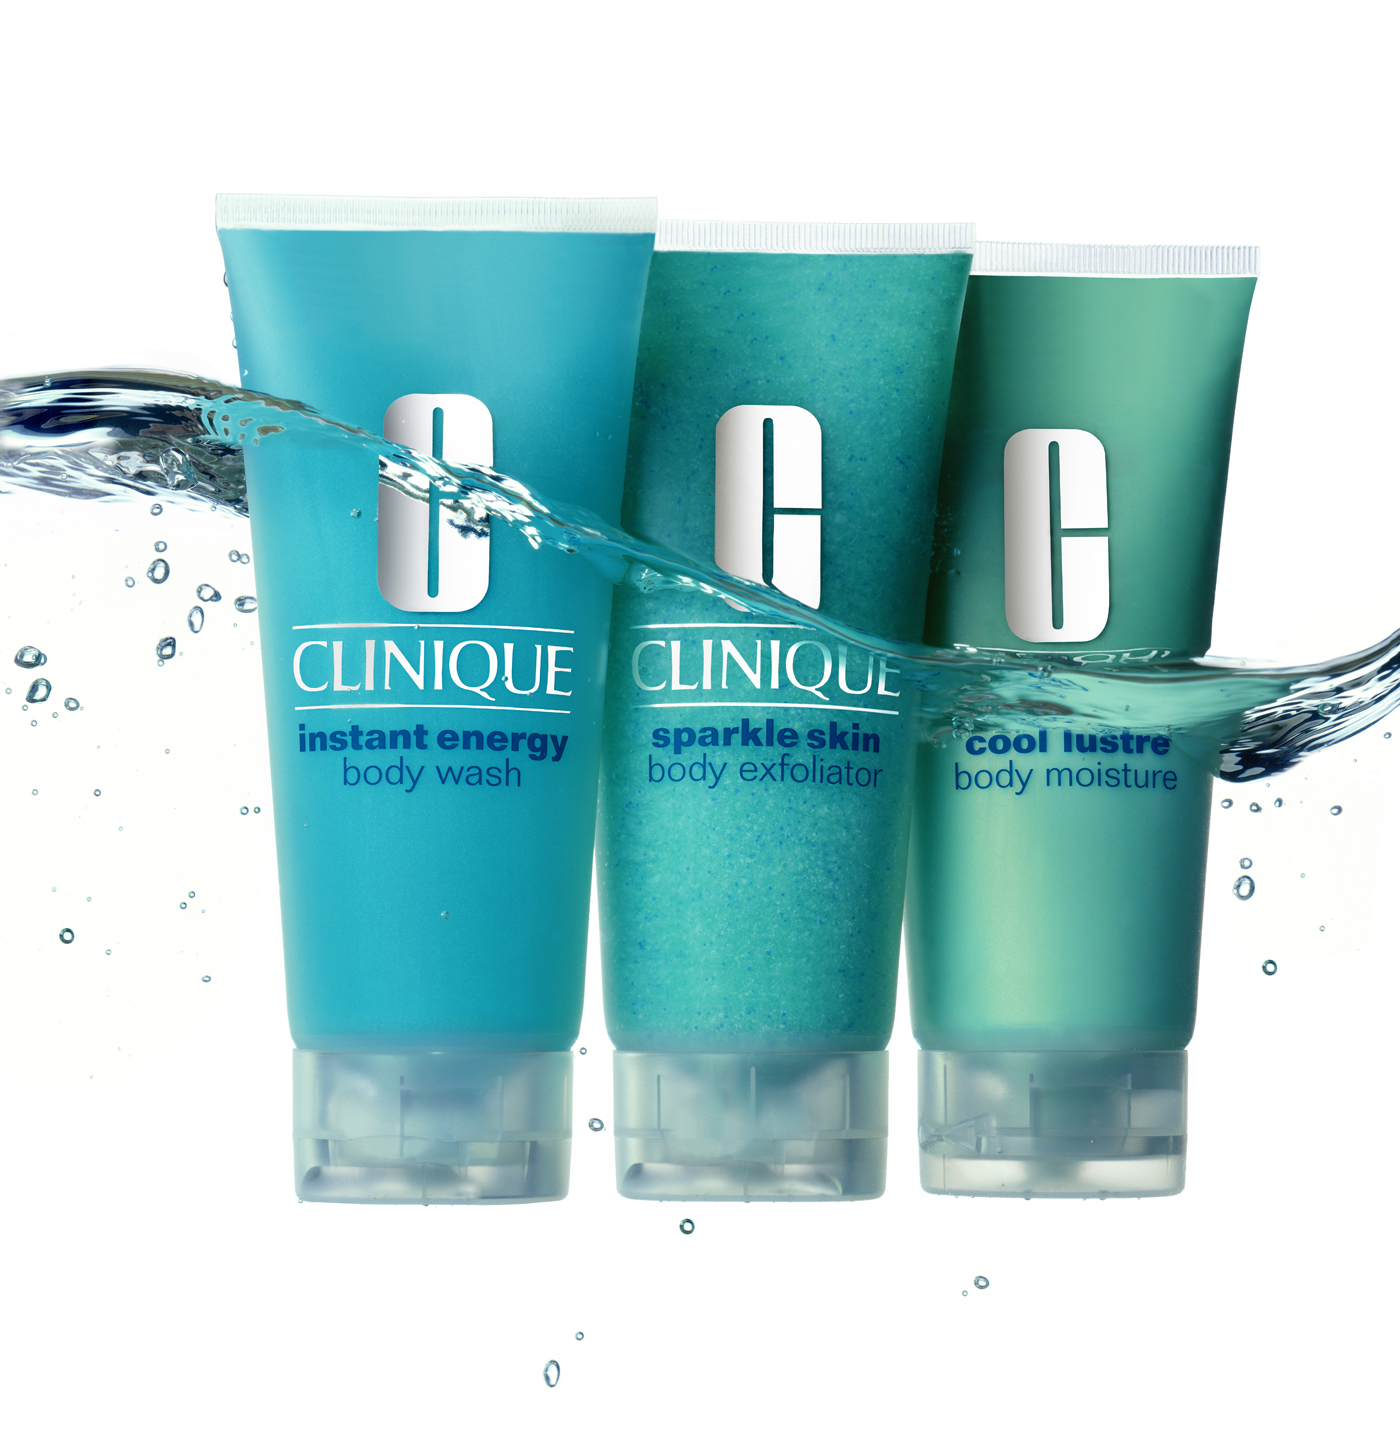 clinique tubes in wave(revised) copy